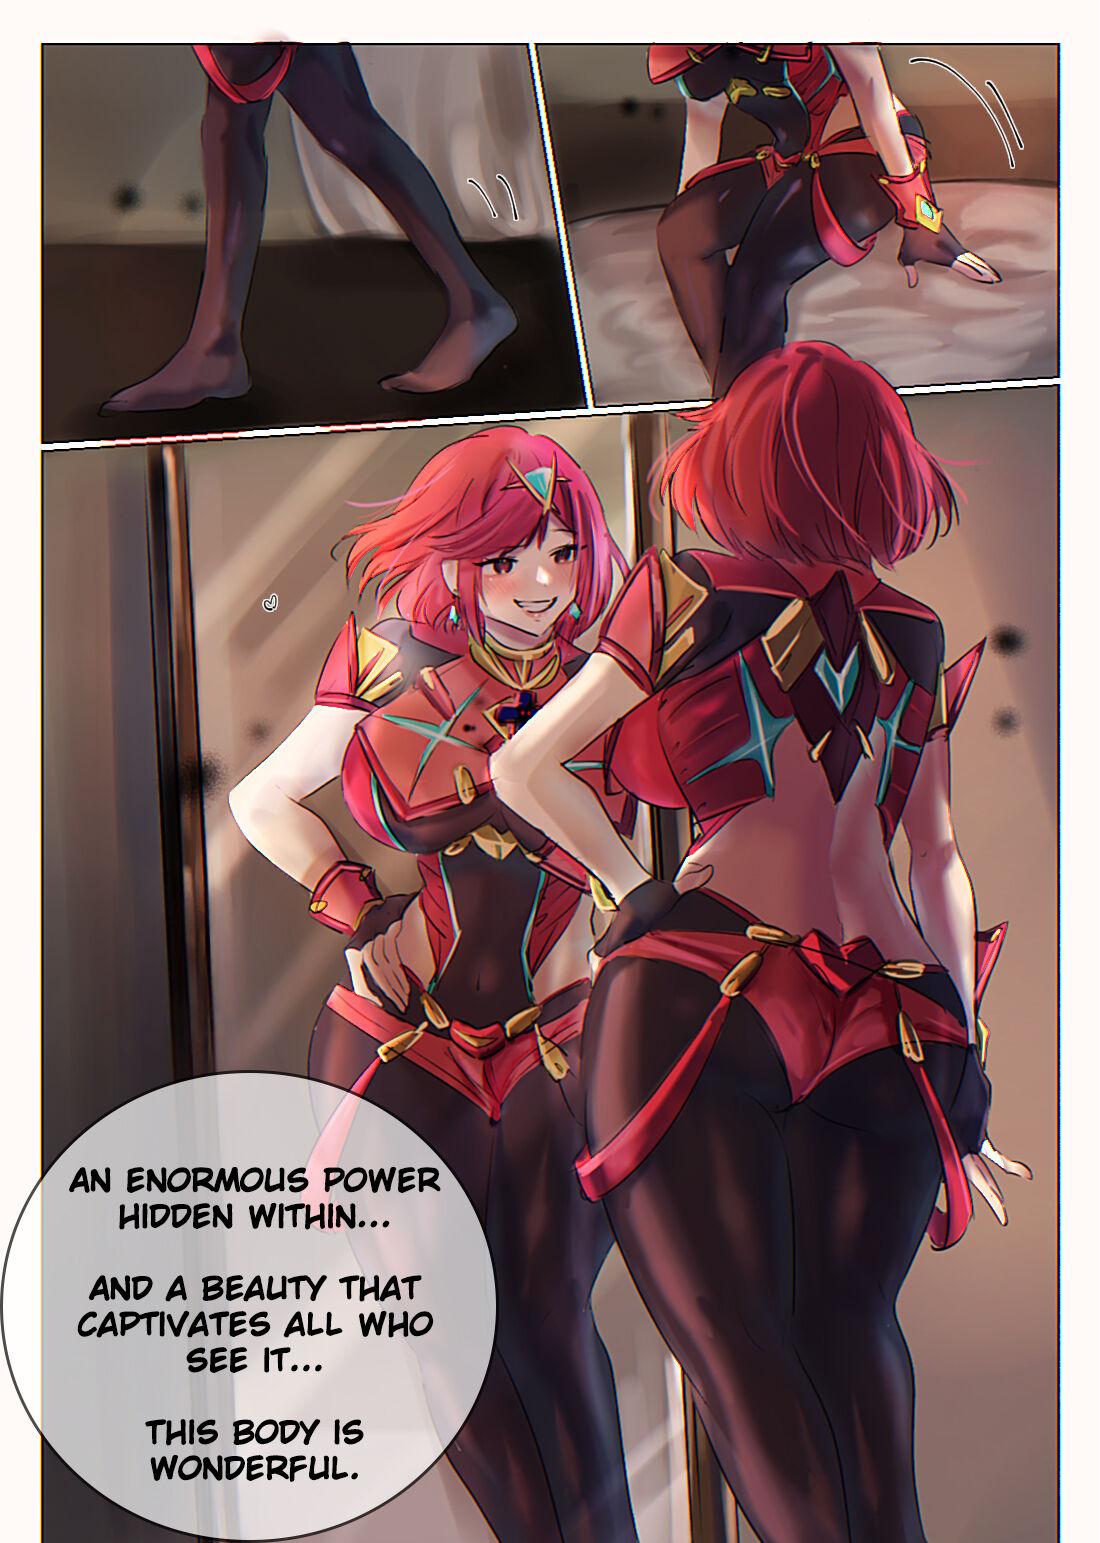 Stepbrother Possessing Pyra and Mythra - Xenoblade chronicles 2 Amateur Blowjob - Page 6